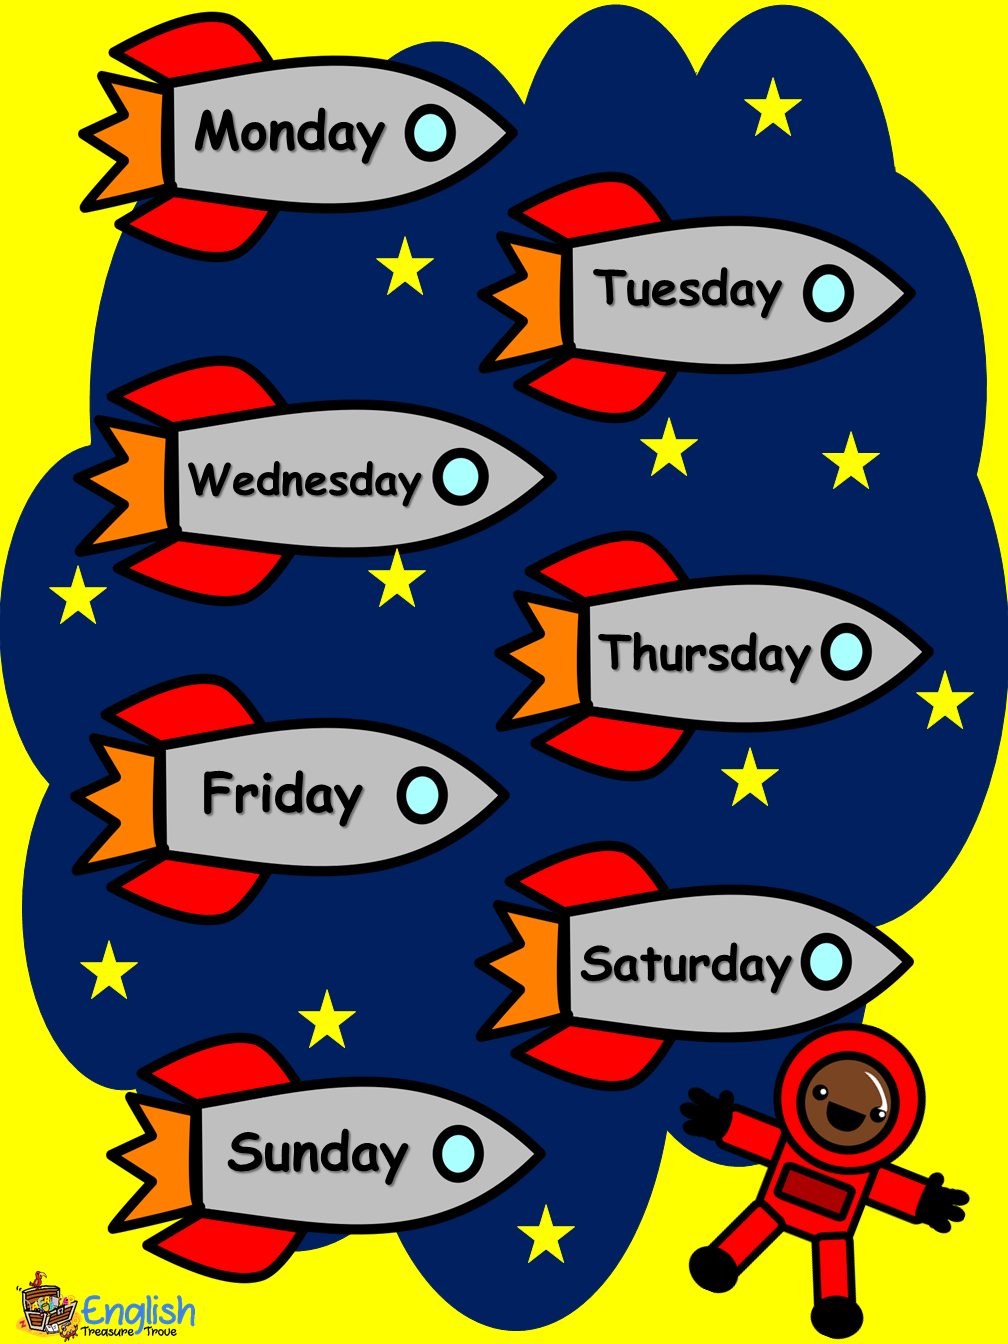 Days of the week in Spanish - Rocket Languages